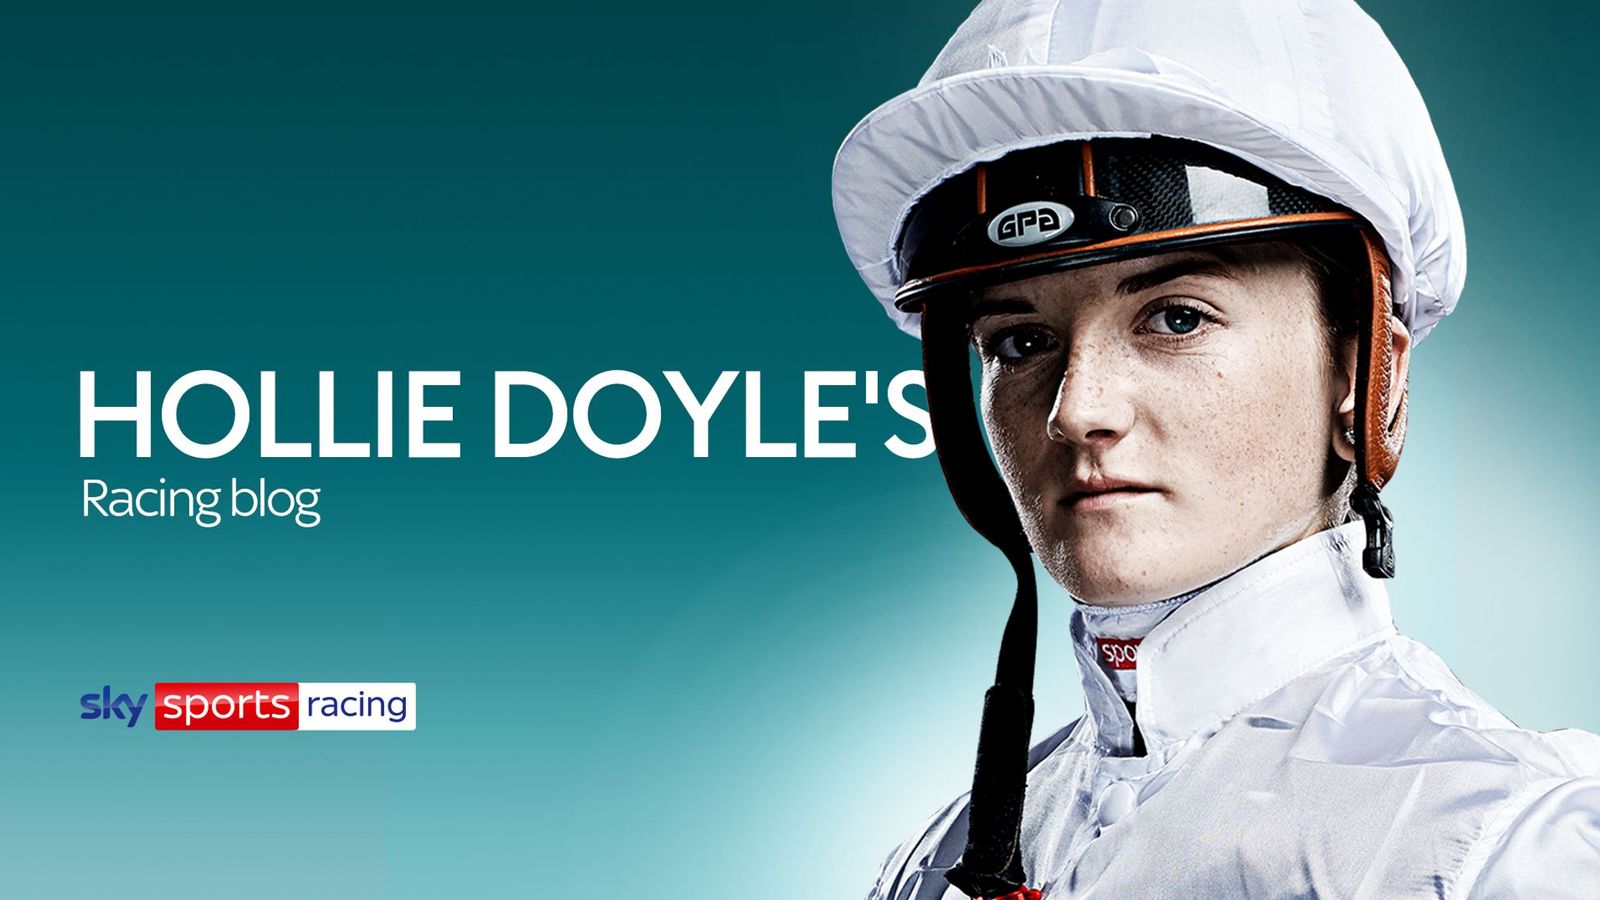 Royal Ascot: Sky Sports Racing ambassador Hollie Doyle aiming for Group One glory with Rizg in Commonwealth Cup